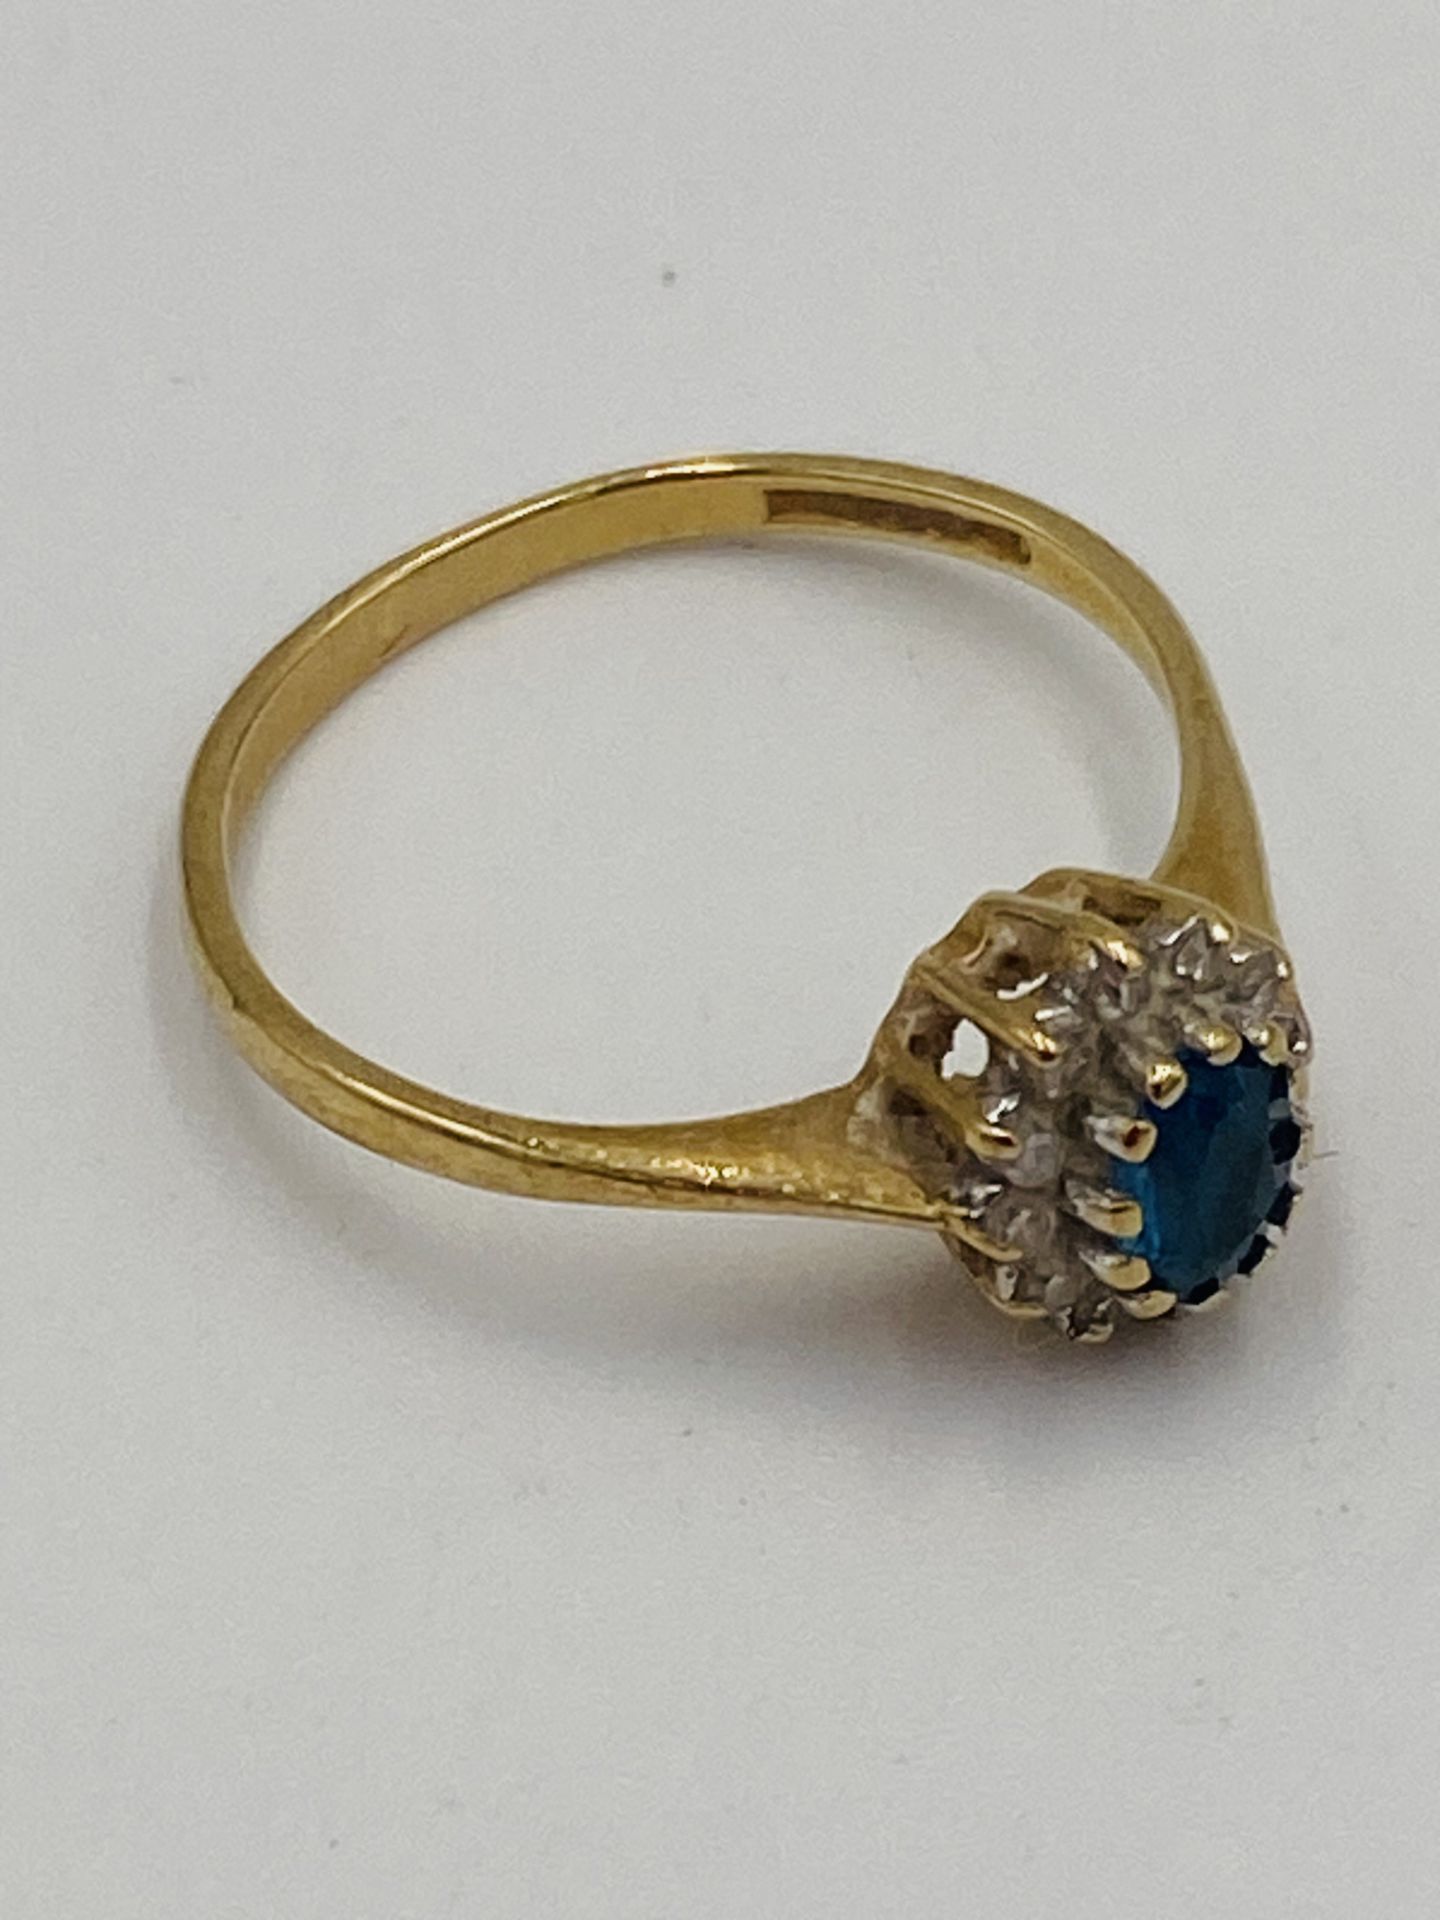 9ct gold ring set with a blue stone - Image 3 of 4